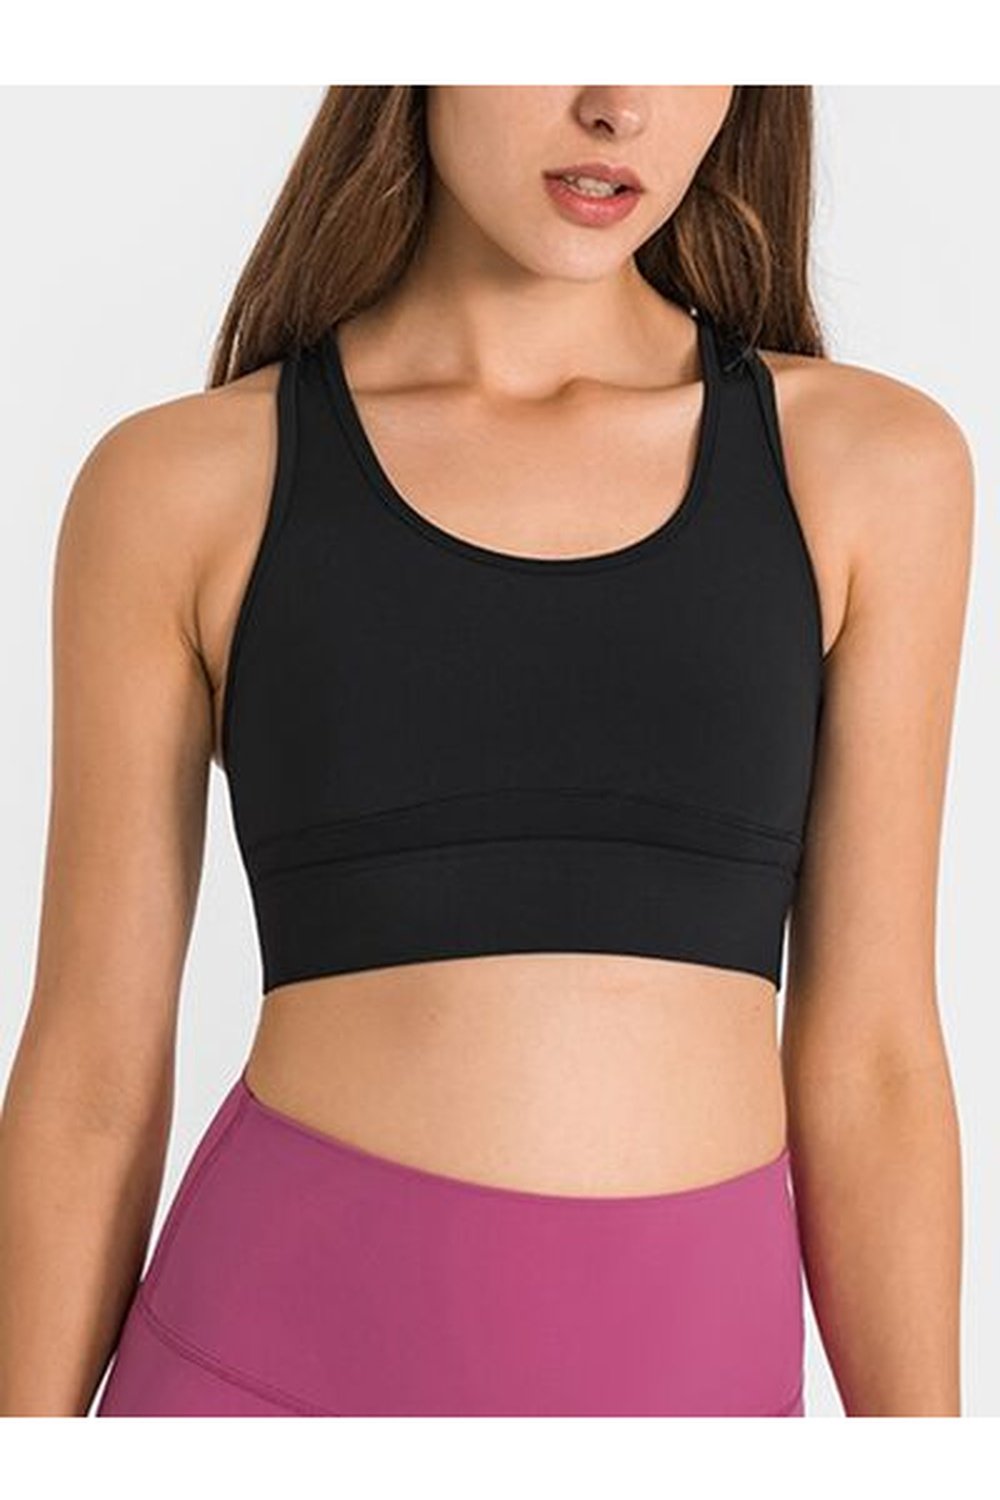 Double Take Round Neck Racerback Cropped Tank - Crop Tops & Tank Tops - FITGGINS